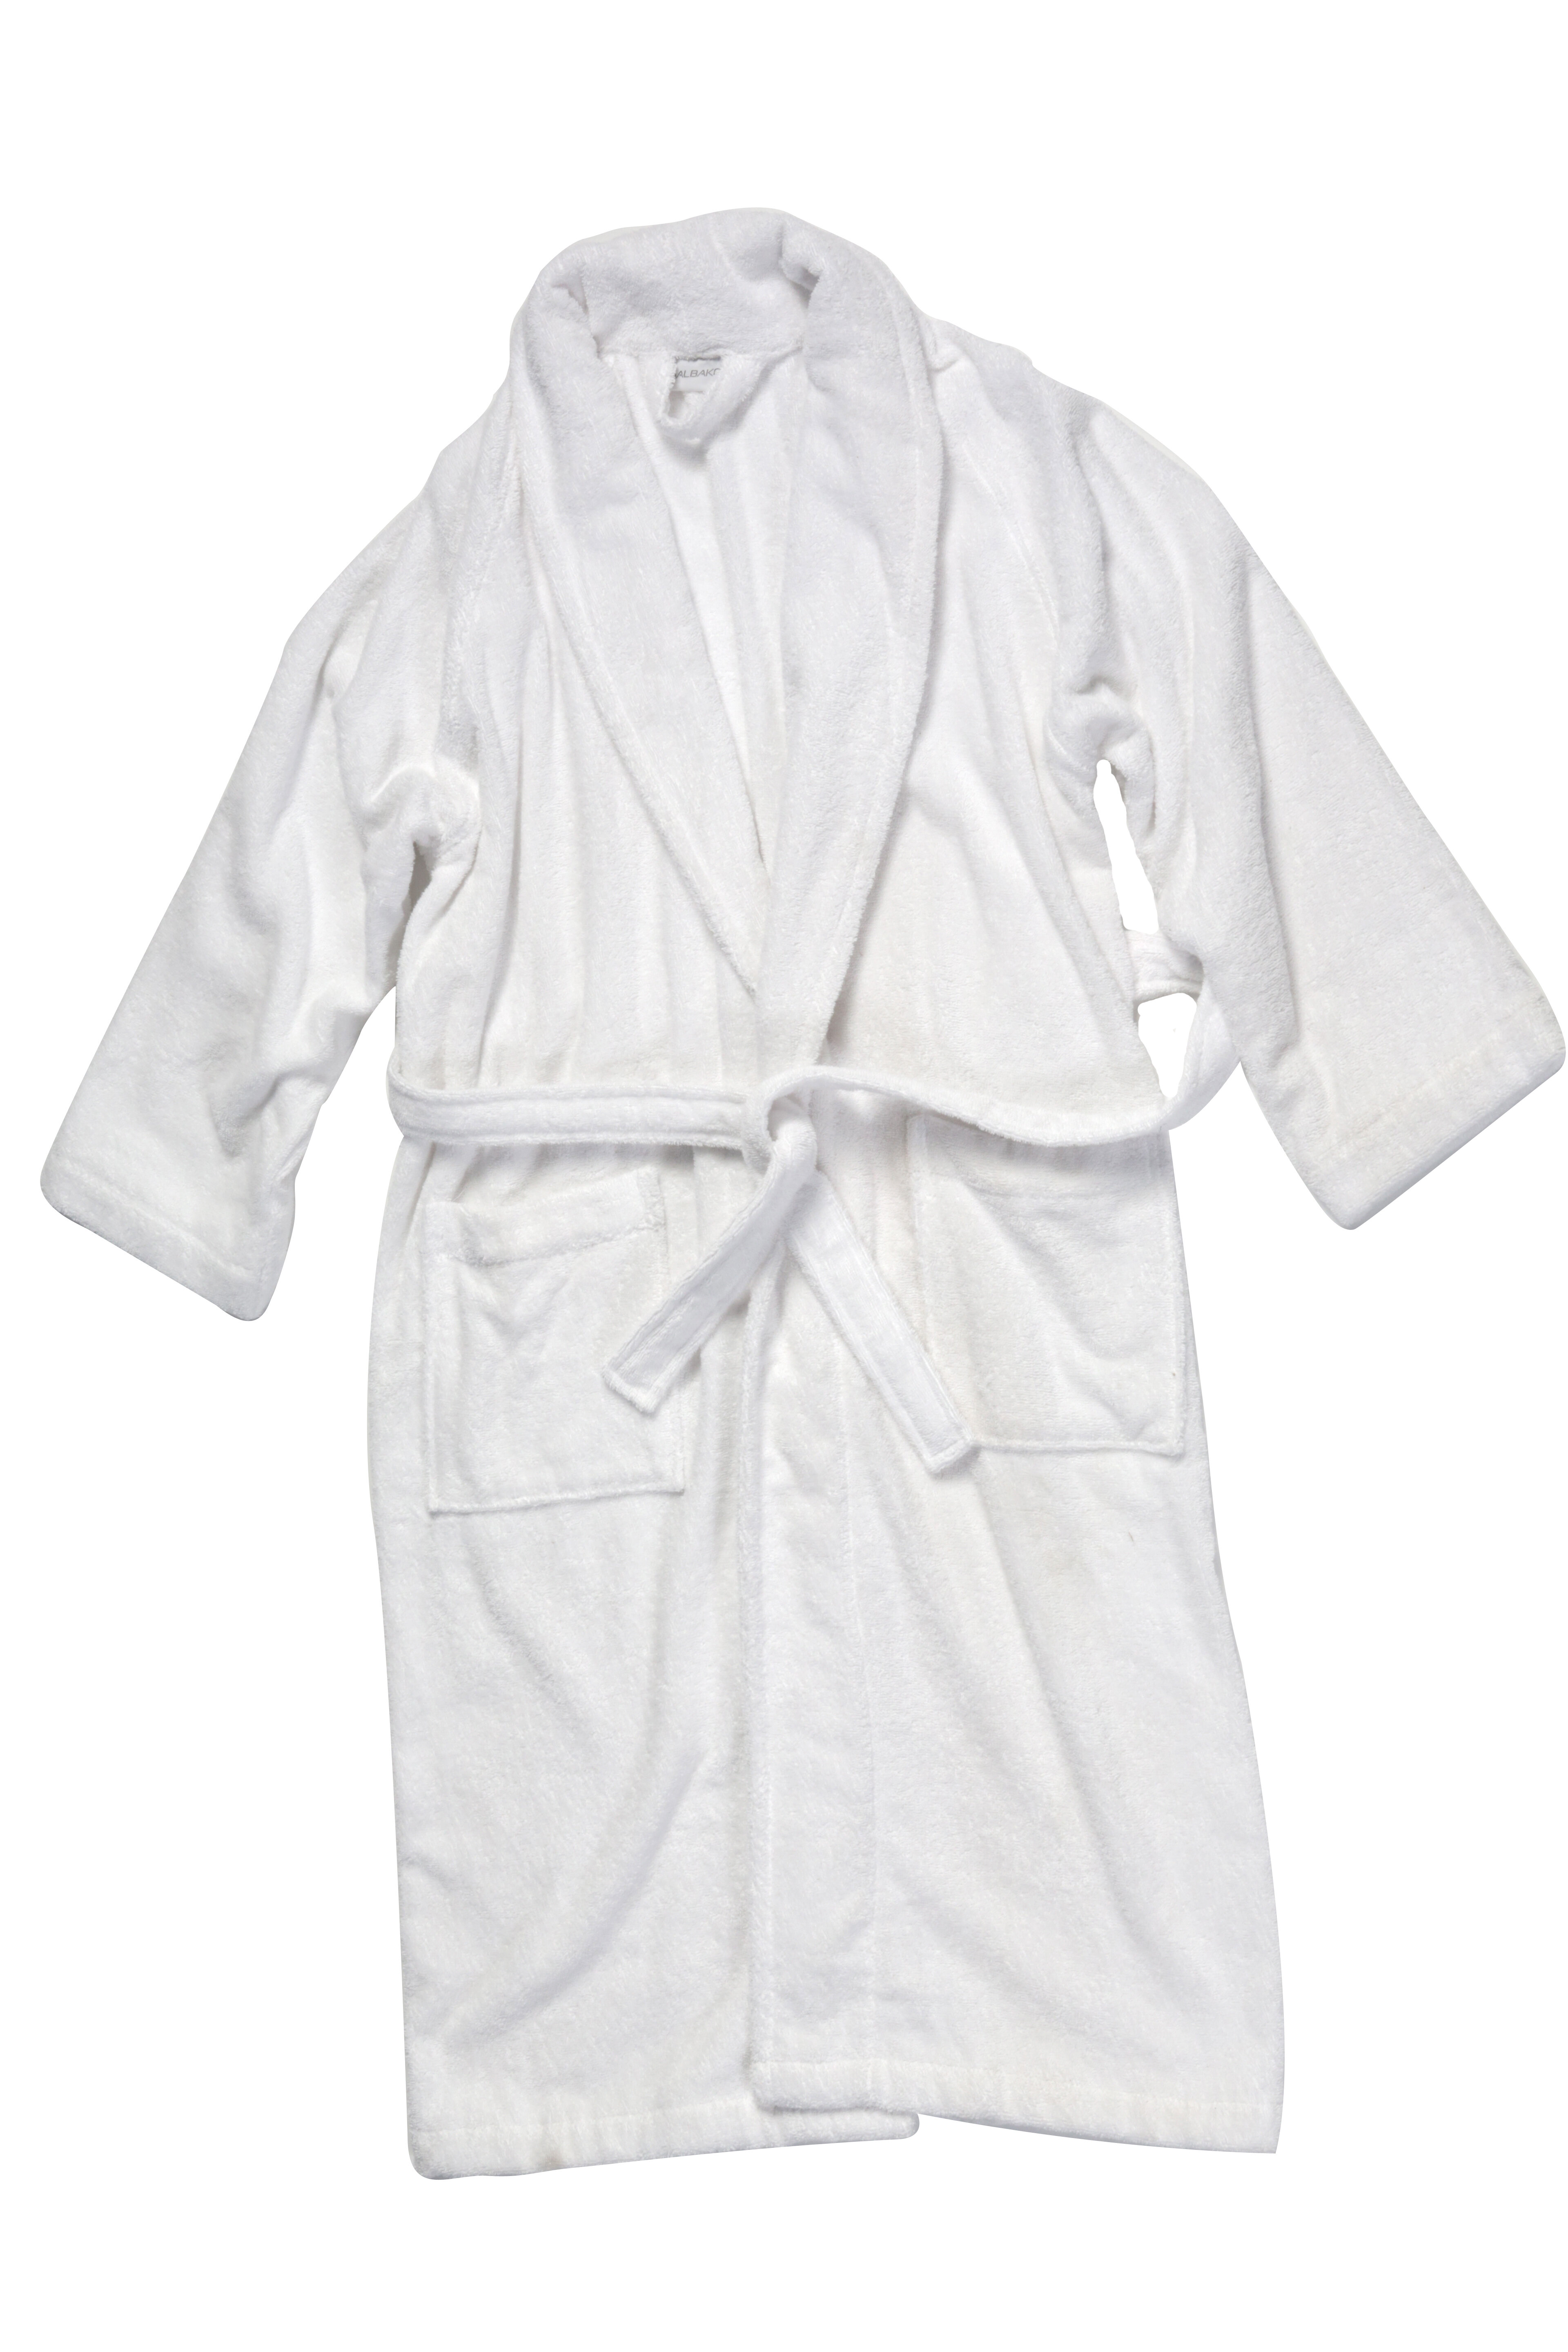 One Size Medium Unisex Hotel Commercial 100% Cotton Terry Towelling Bath Robe 